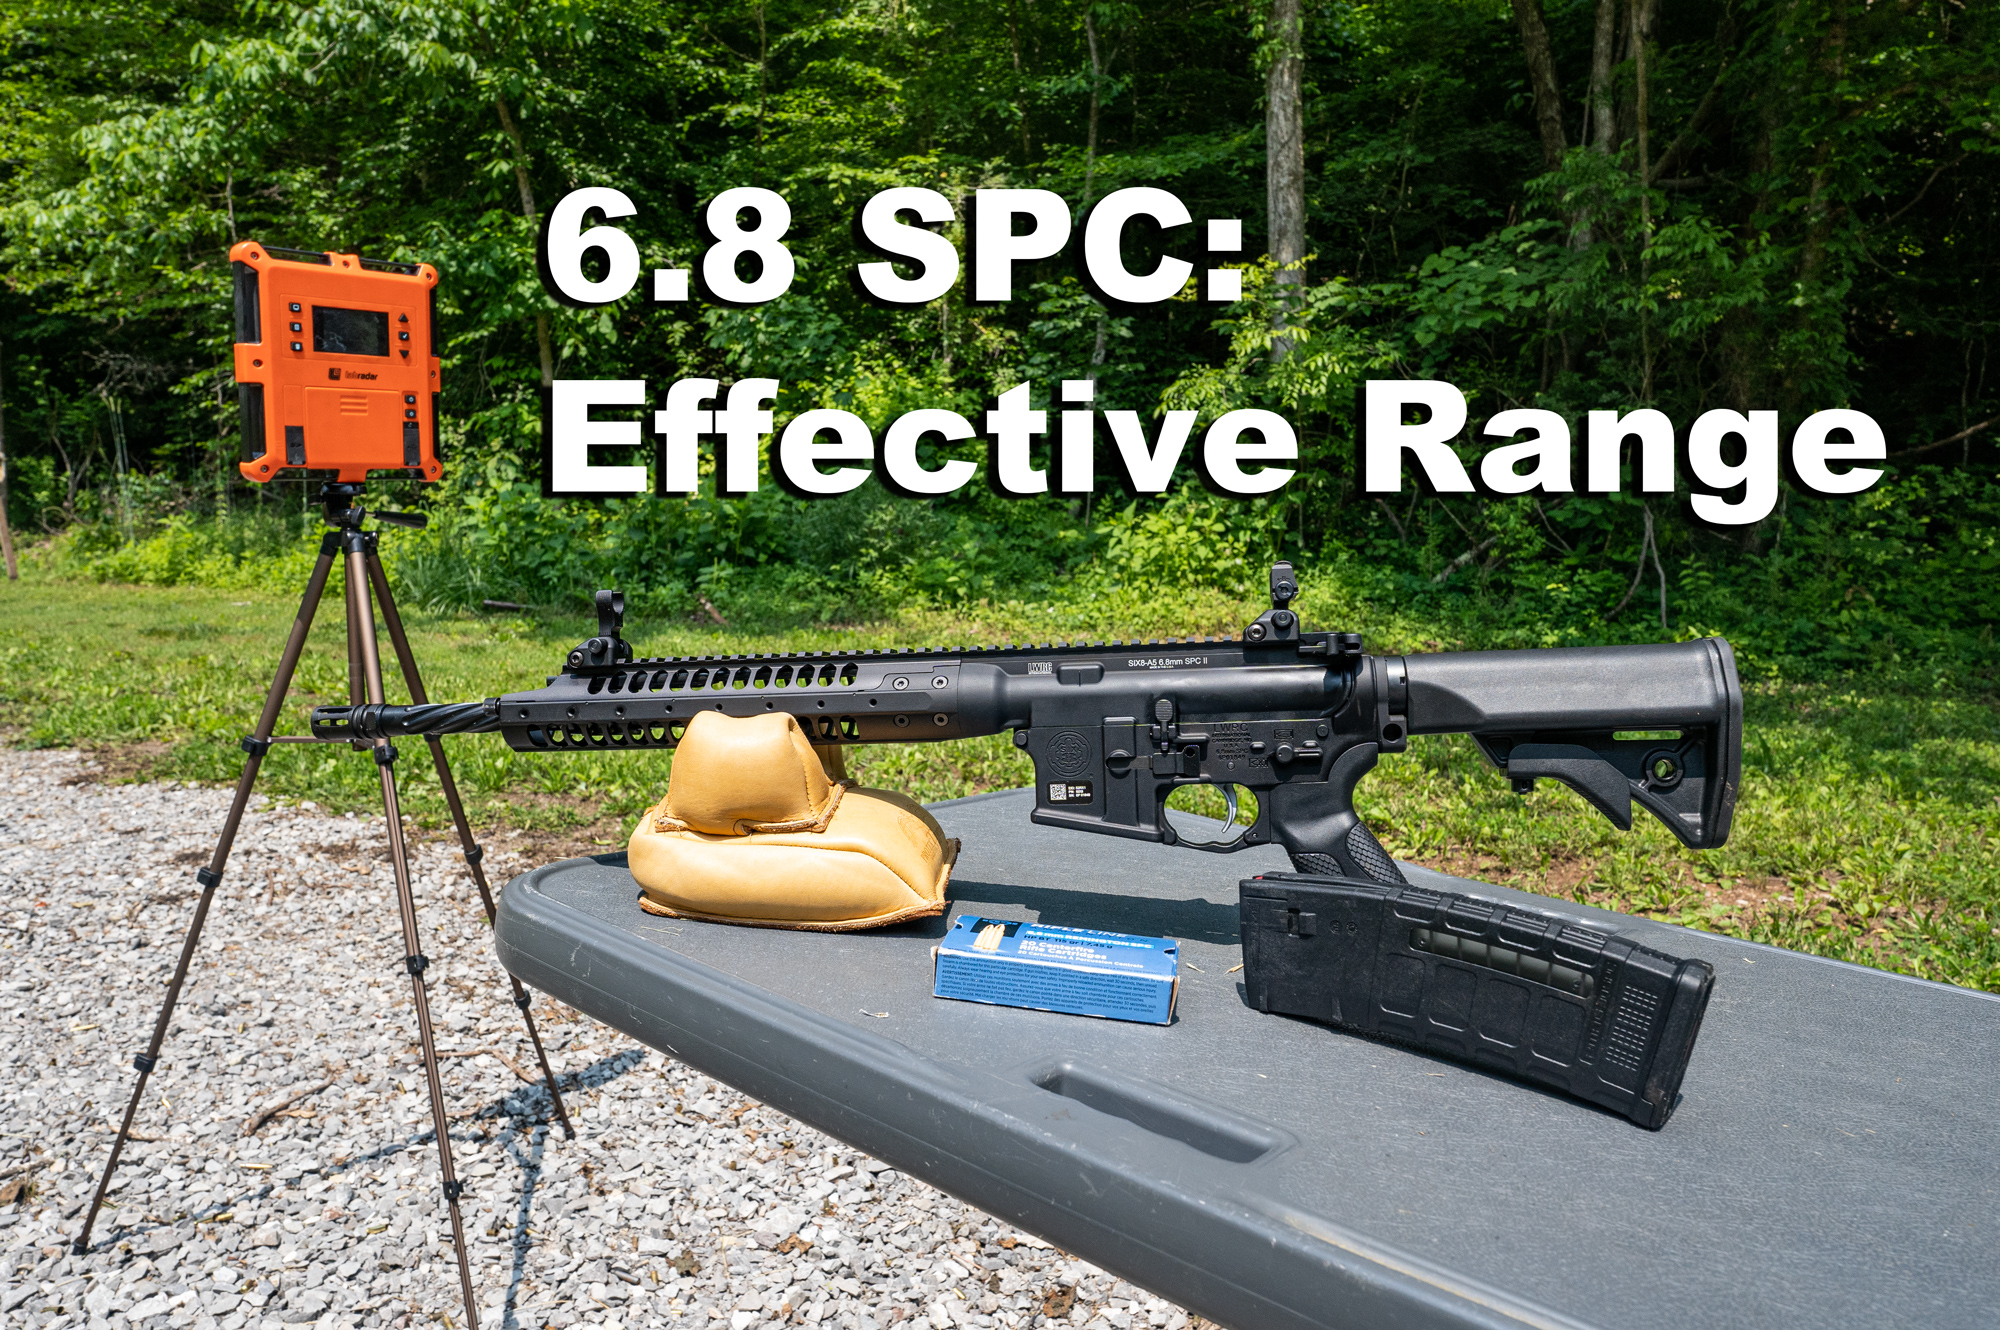 6.8 SPC effective range tested with a rifle at a shooting range